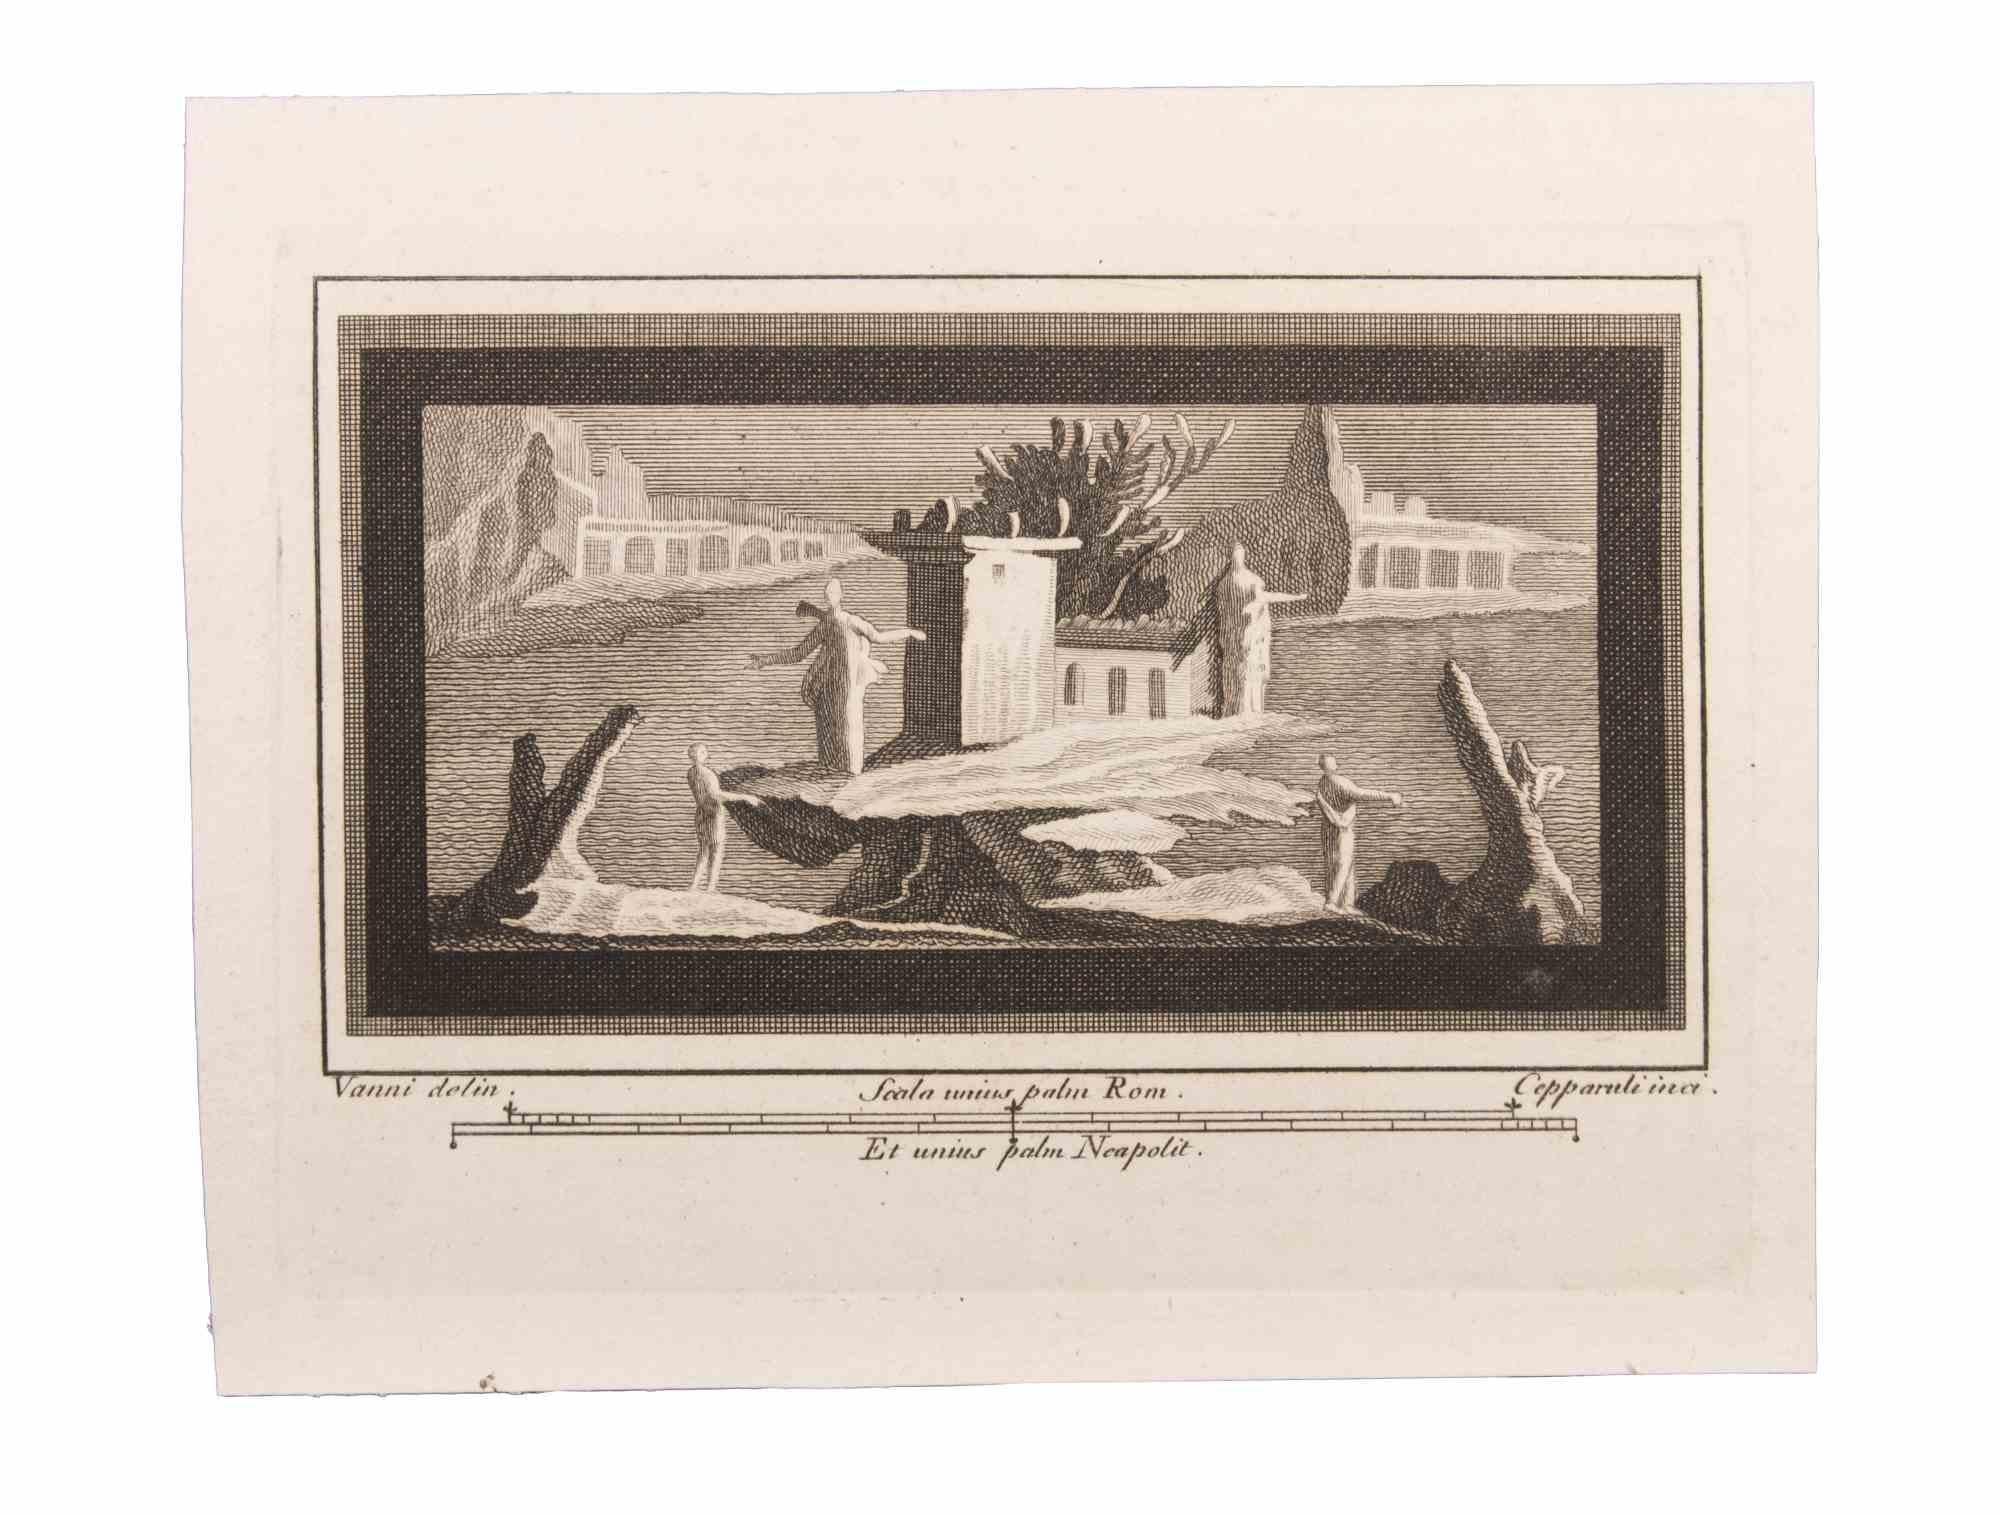 Francesco Cepparuli Figurative Print - Seascape with Monument and Figures - Etching by F. Cepparuli - 18th Century